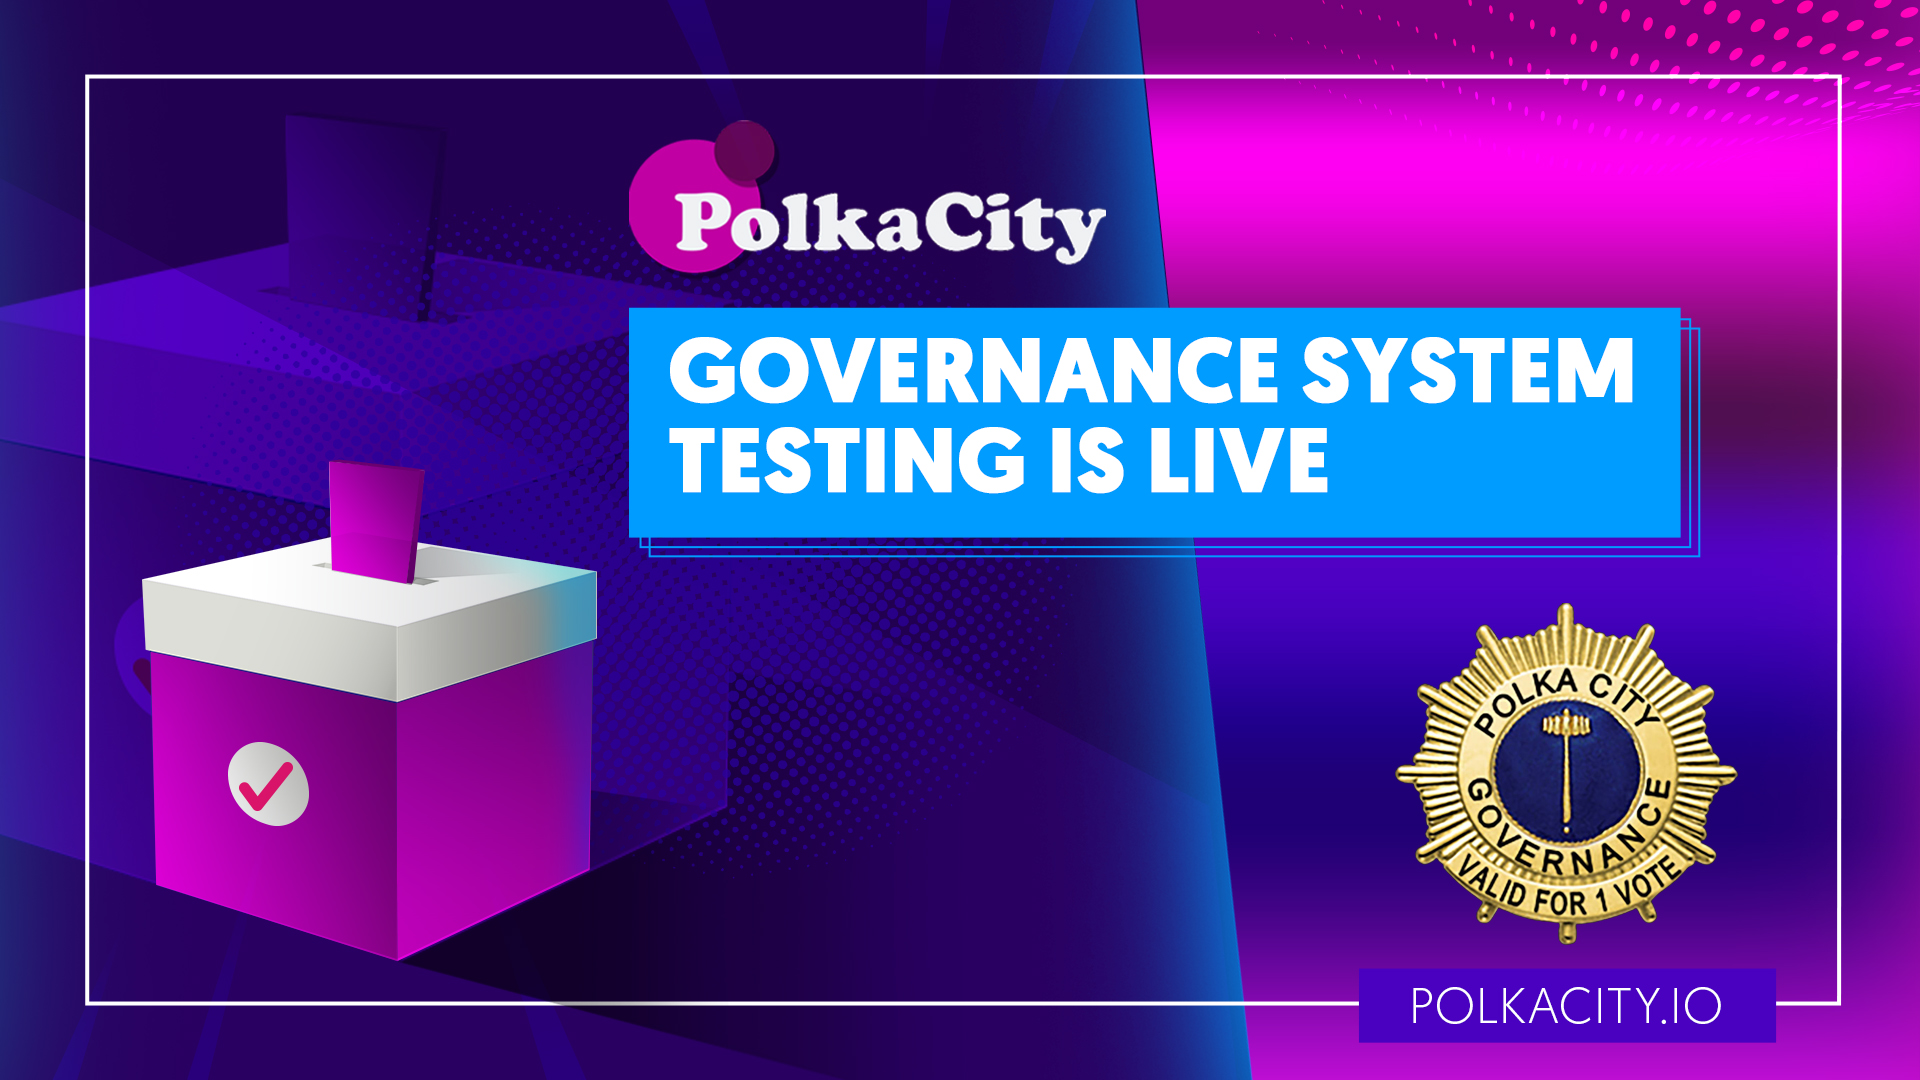 The Polkacity Governance Platform is now available for testing   If all goes well with testing, we will launch the platform soon  Governance NFT [polkacity.io]  Vote 🗳  [polkacity.io]  #POLC #GOVERNANCE #NFTVOTE #POLKACITY #METAVERSE #PLAY2EARN [twitter.com] [pbs.twimg.com]